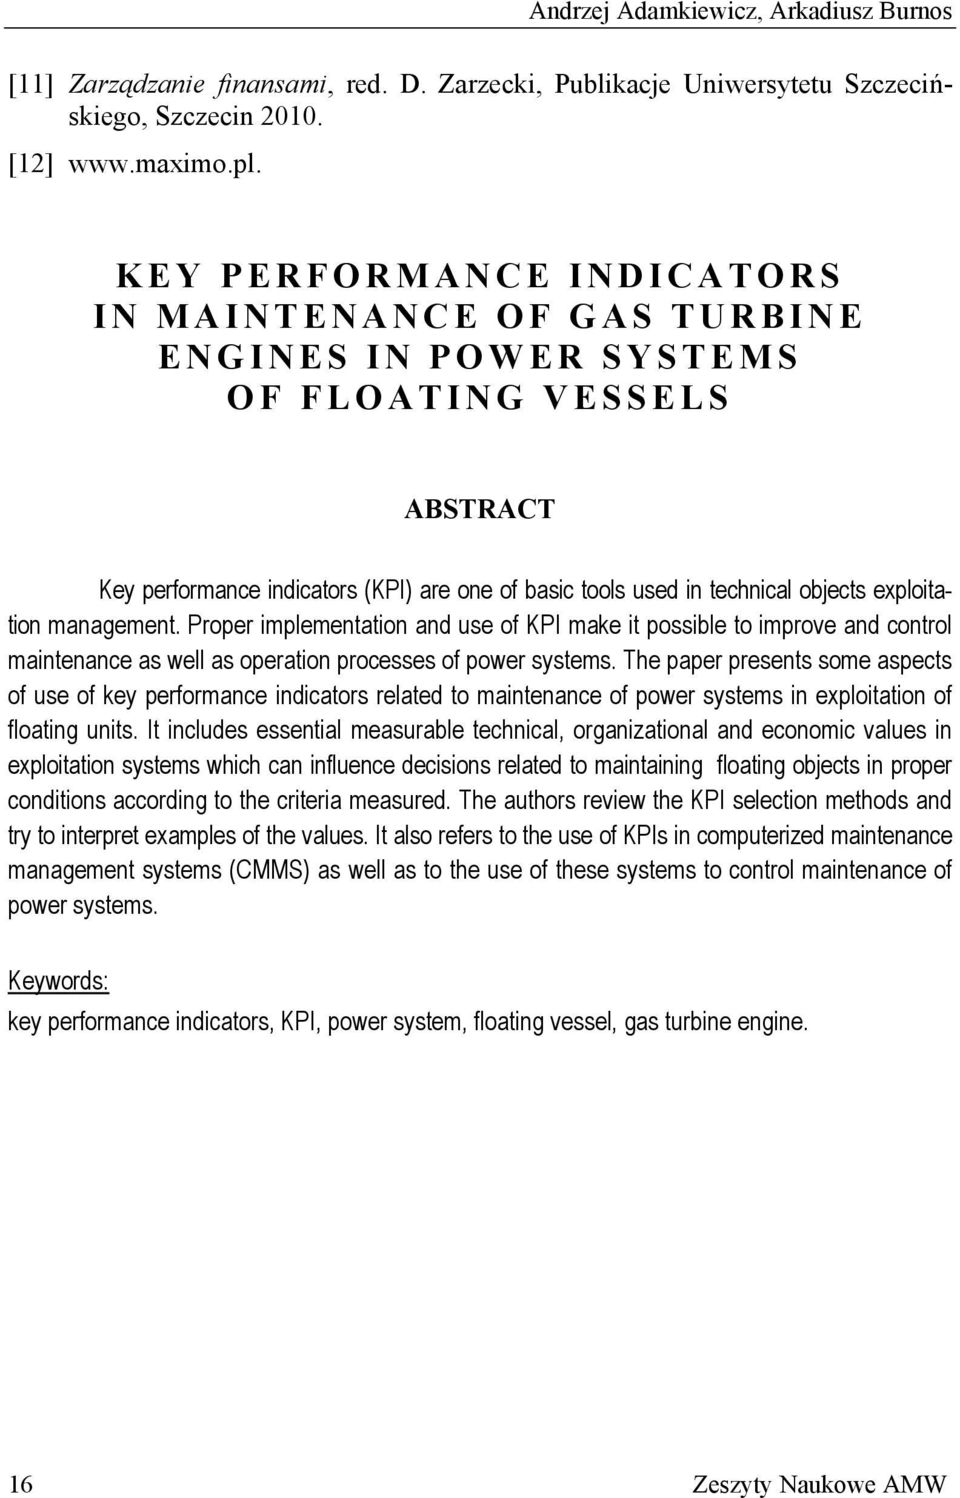 exploitation management. Proper implementation and use of KPI make it possible to improve and control maintenance as well as operation processes of power systems.